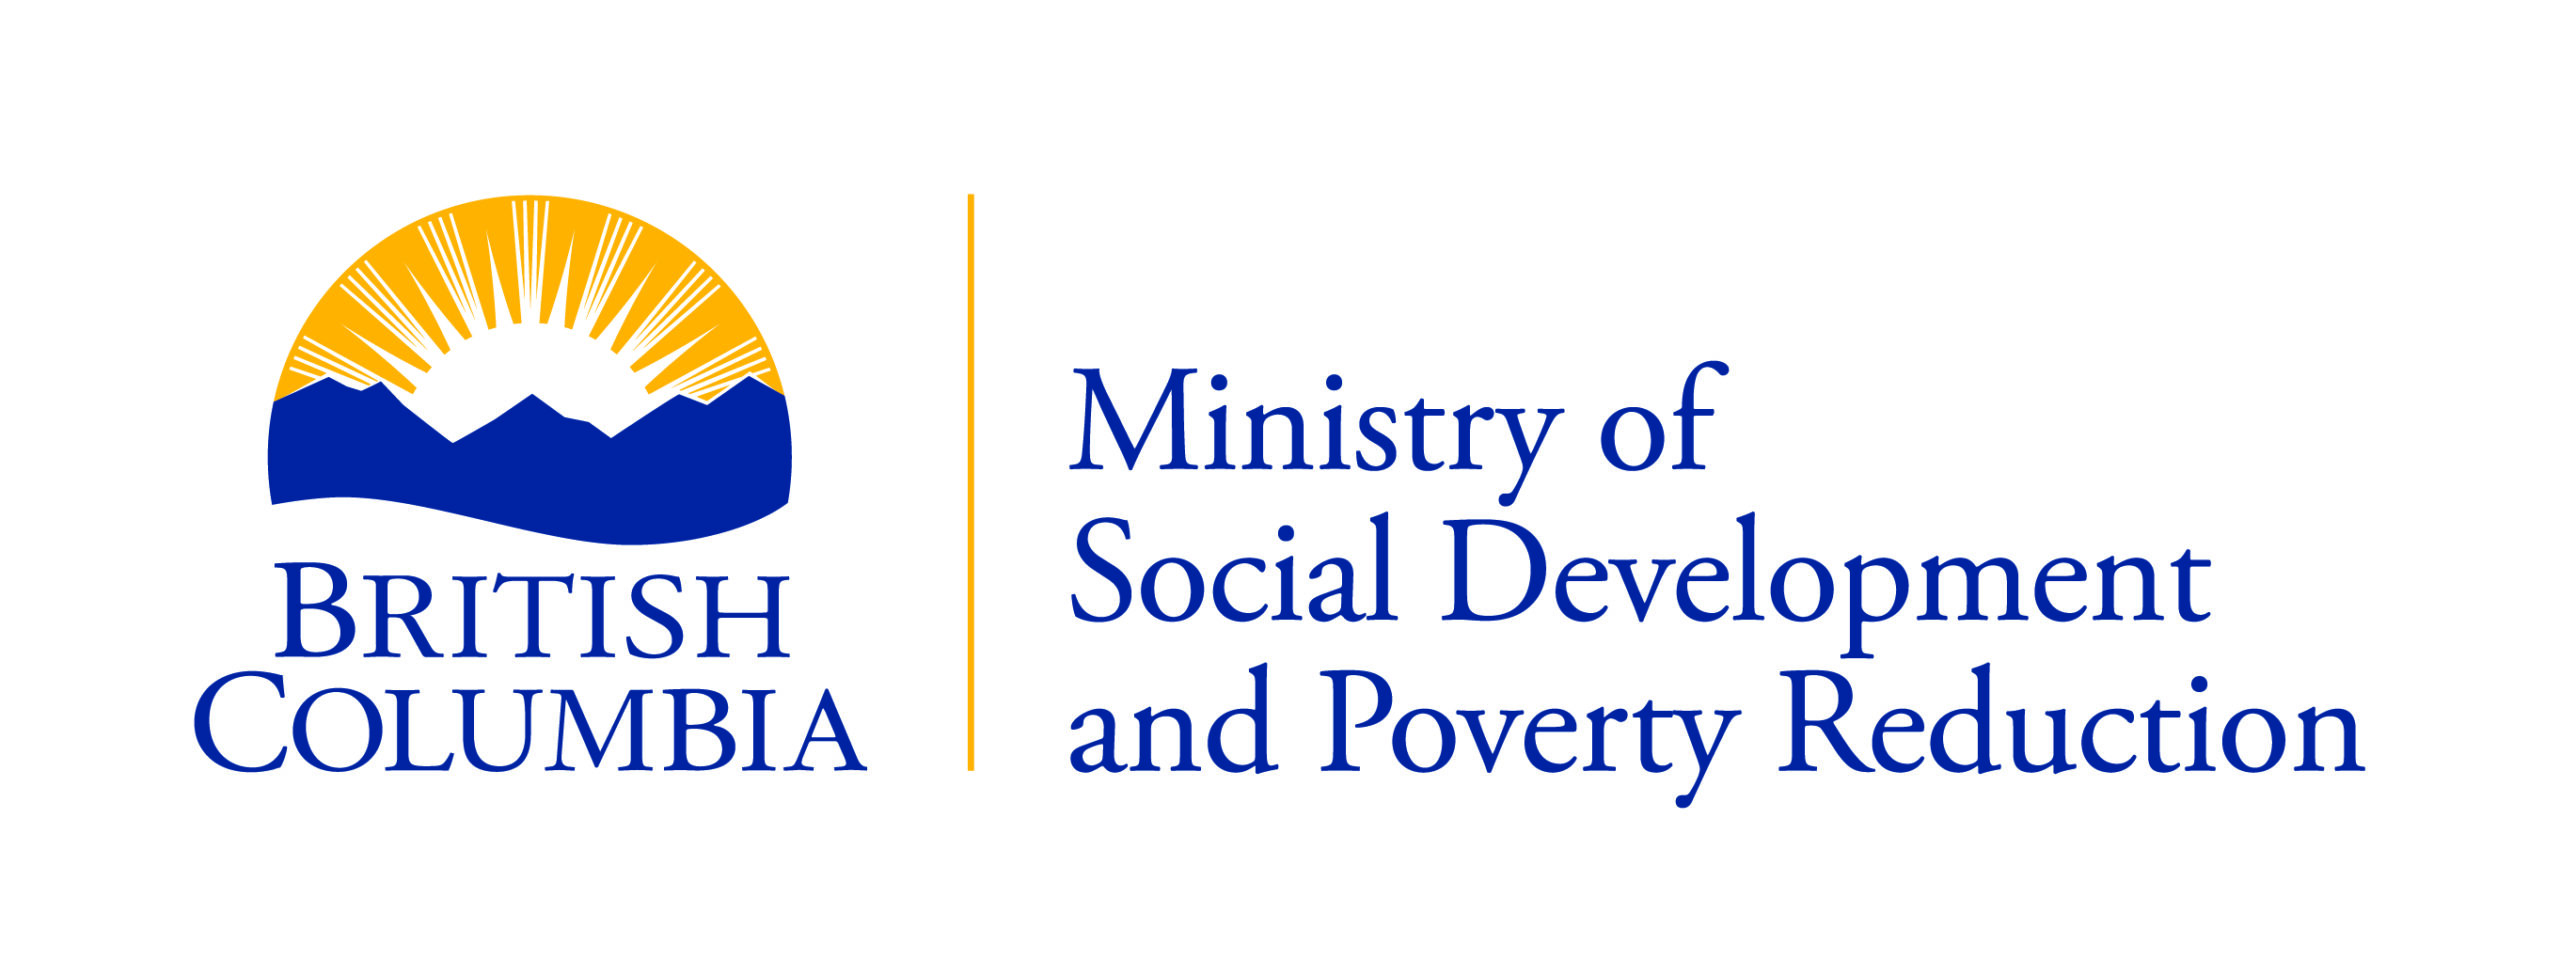 Ministry of Social Development and Poverty Reduction logo